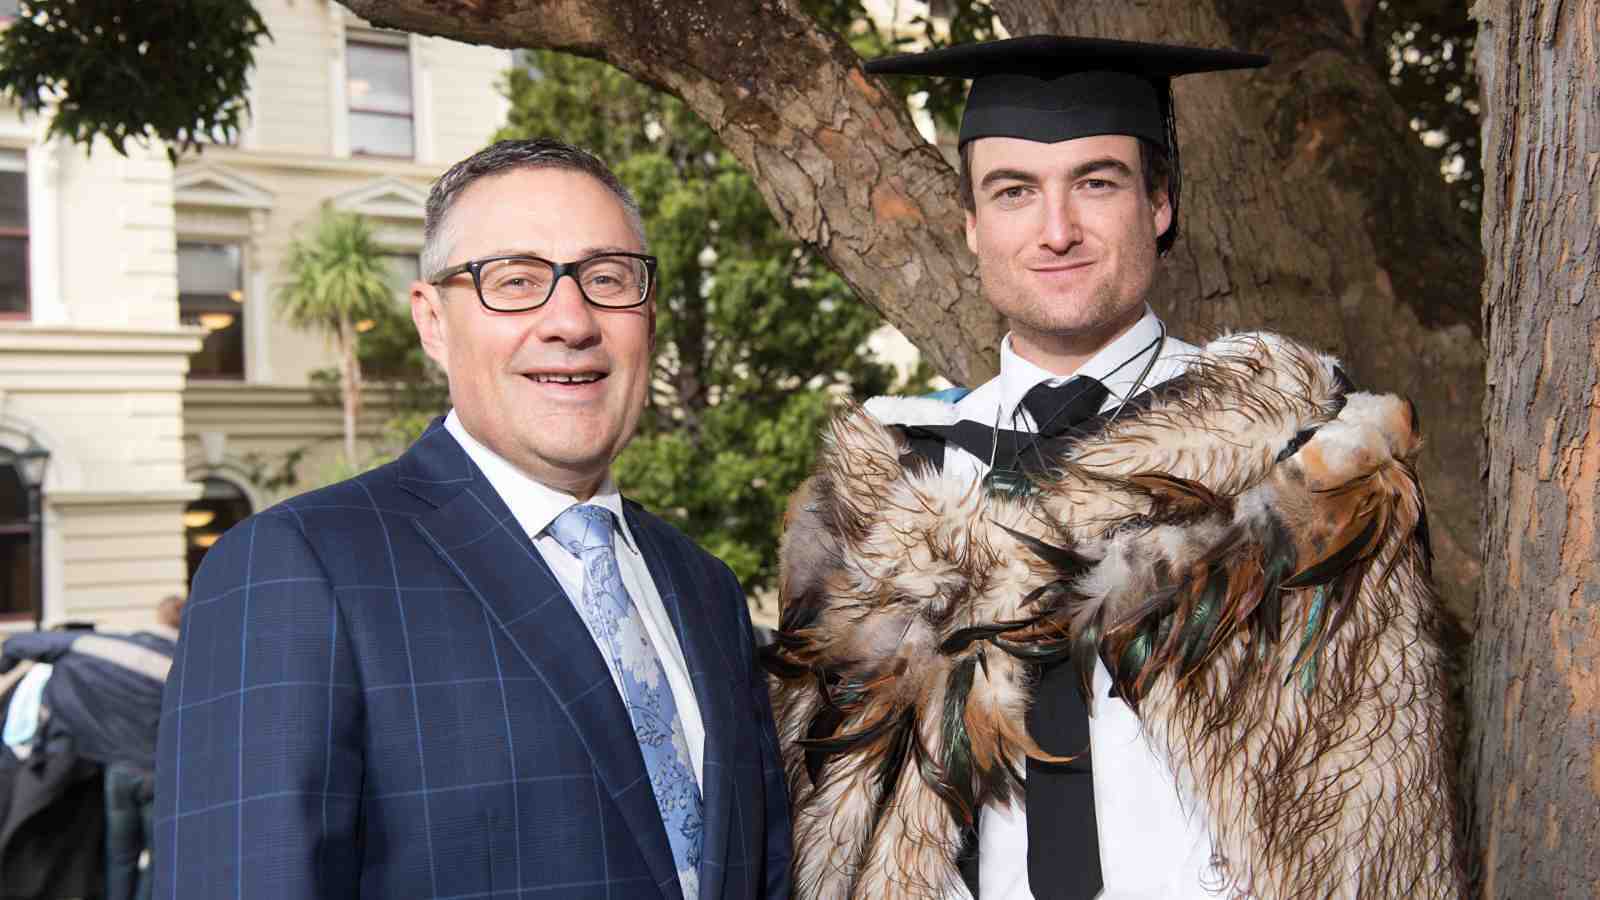 Jack Fletcher, right, with his father Hamish Quentin Fletcher. Standing in front of the Law School.